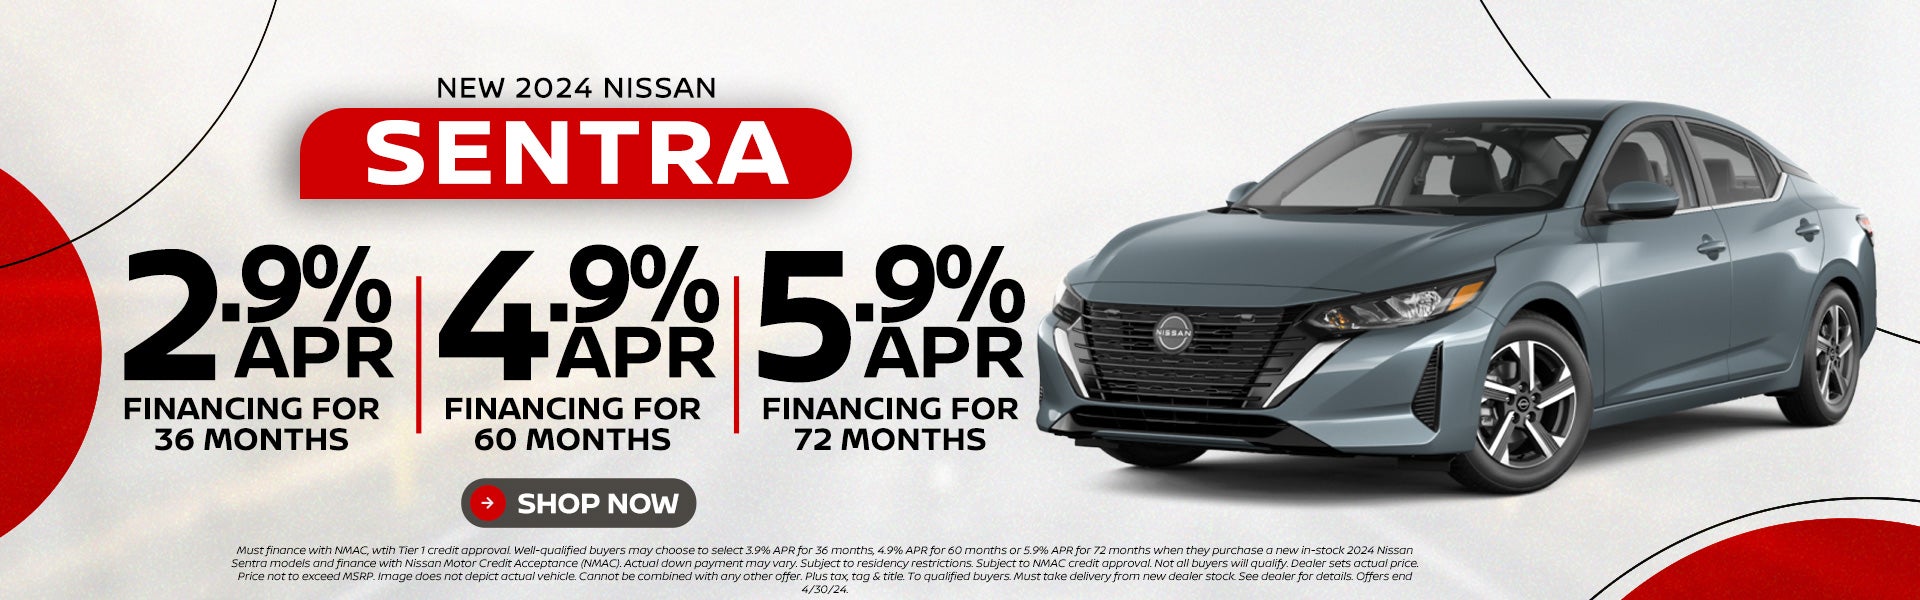 2024 Sentra 3.9% APR for 36 months | 4.9% APR for 60 months 